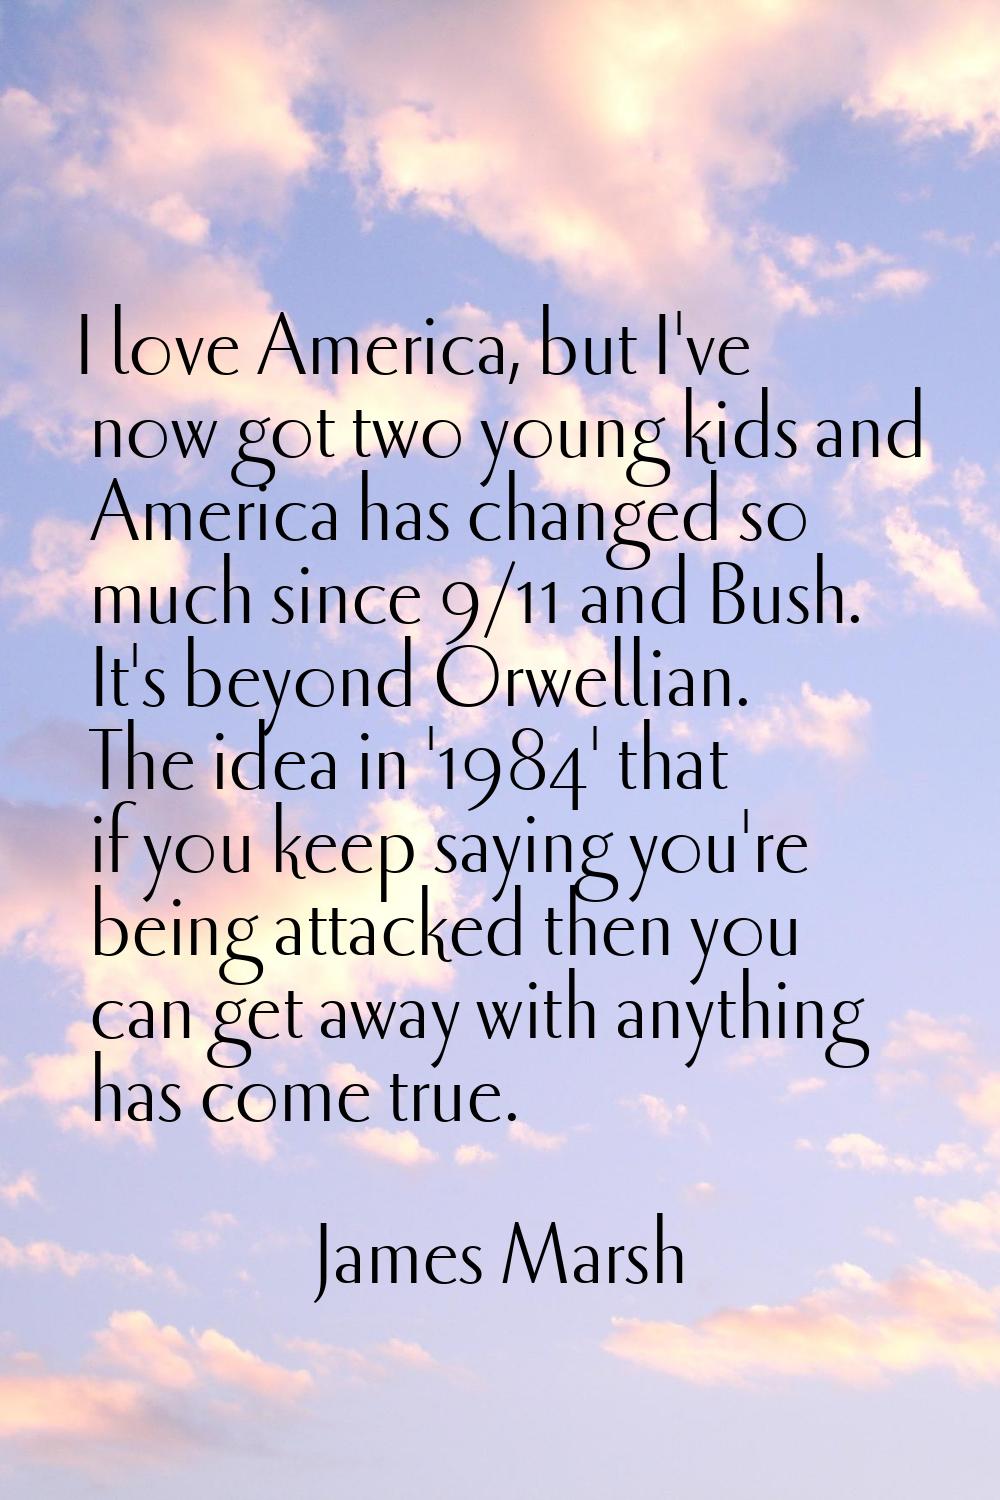 I love America, but I've now got two young kids and America has changed so much since 9/11 and Bush